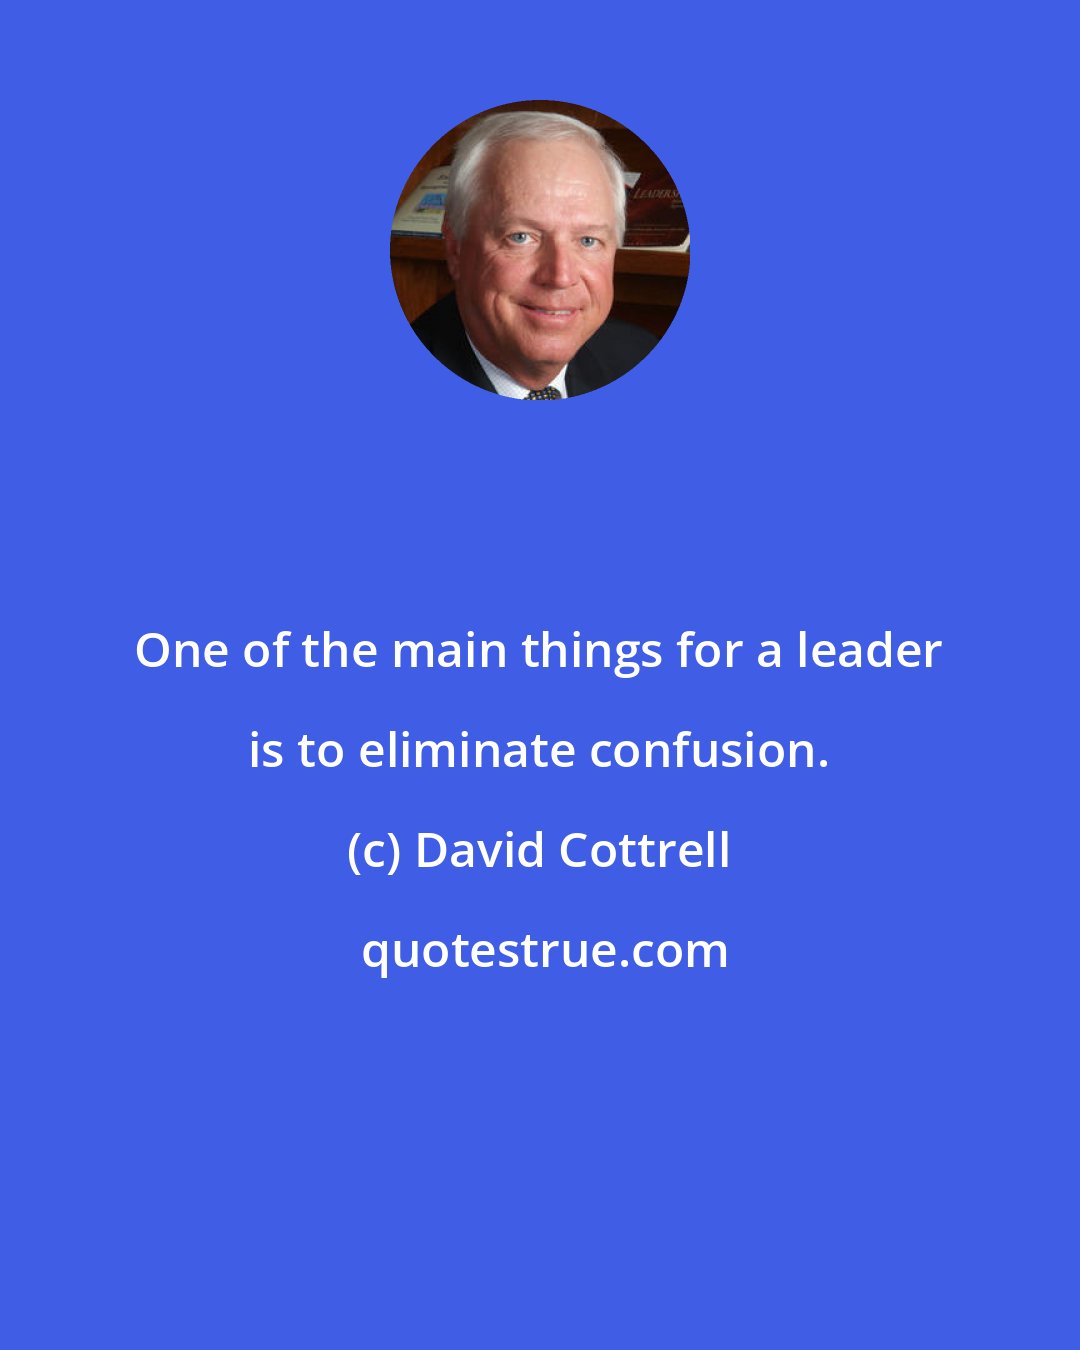 David Cottrell: One of the main things for a leader is to eliminate confusion.